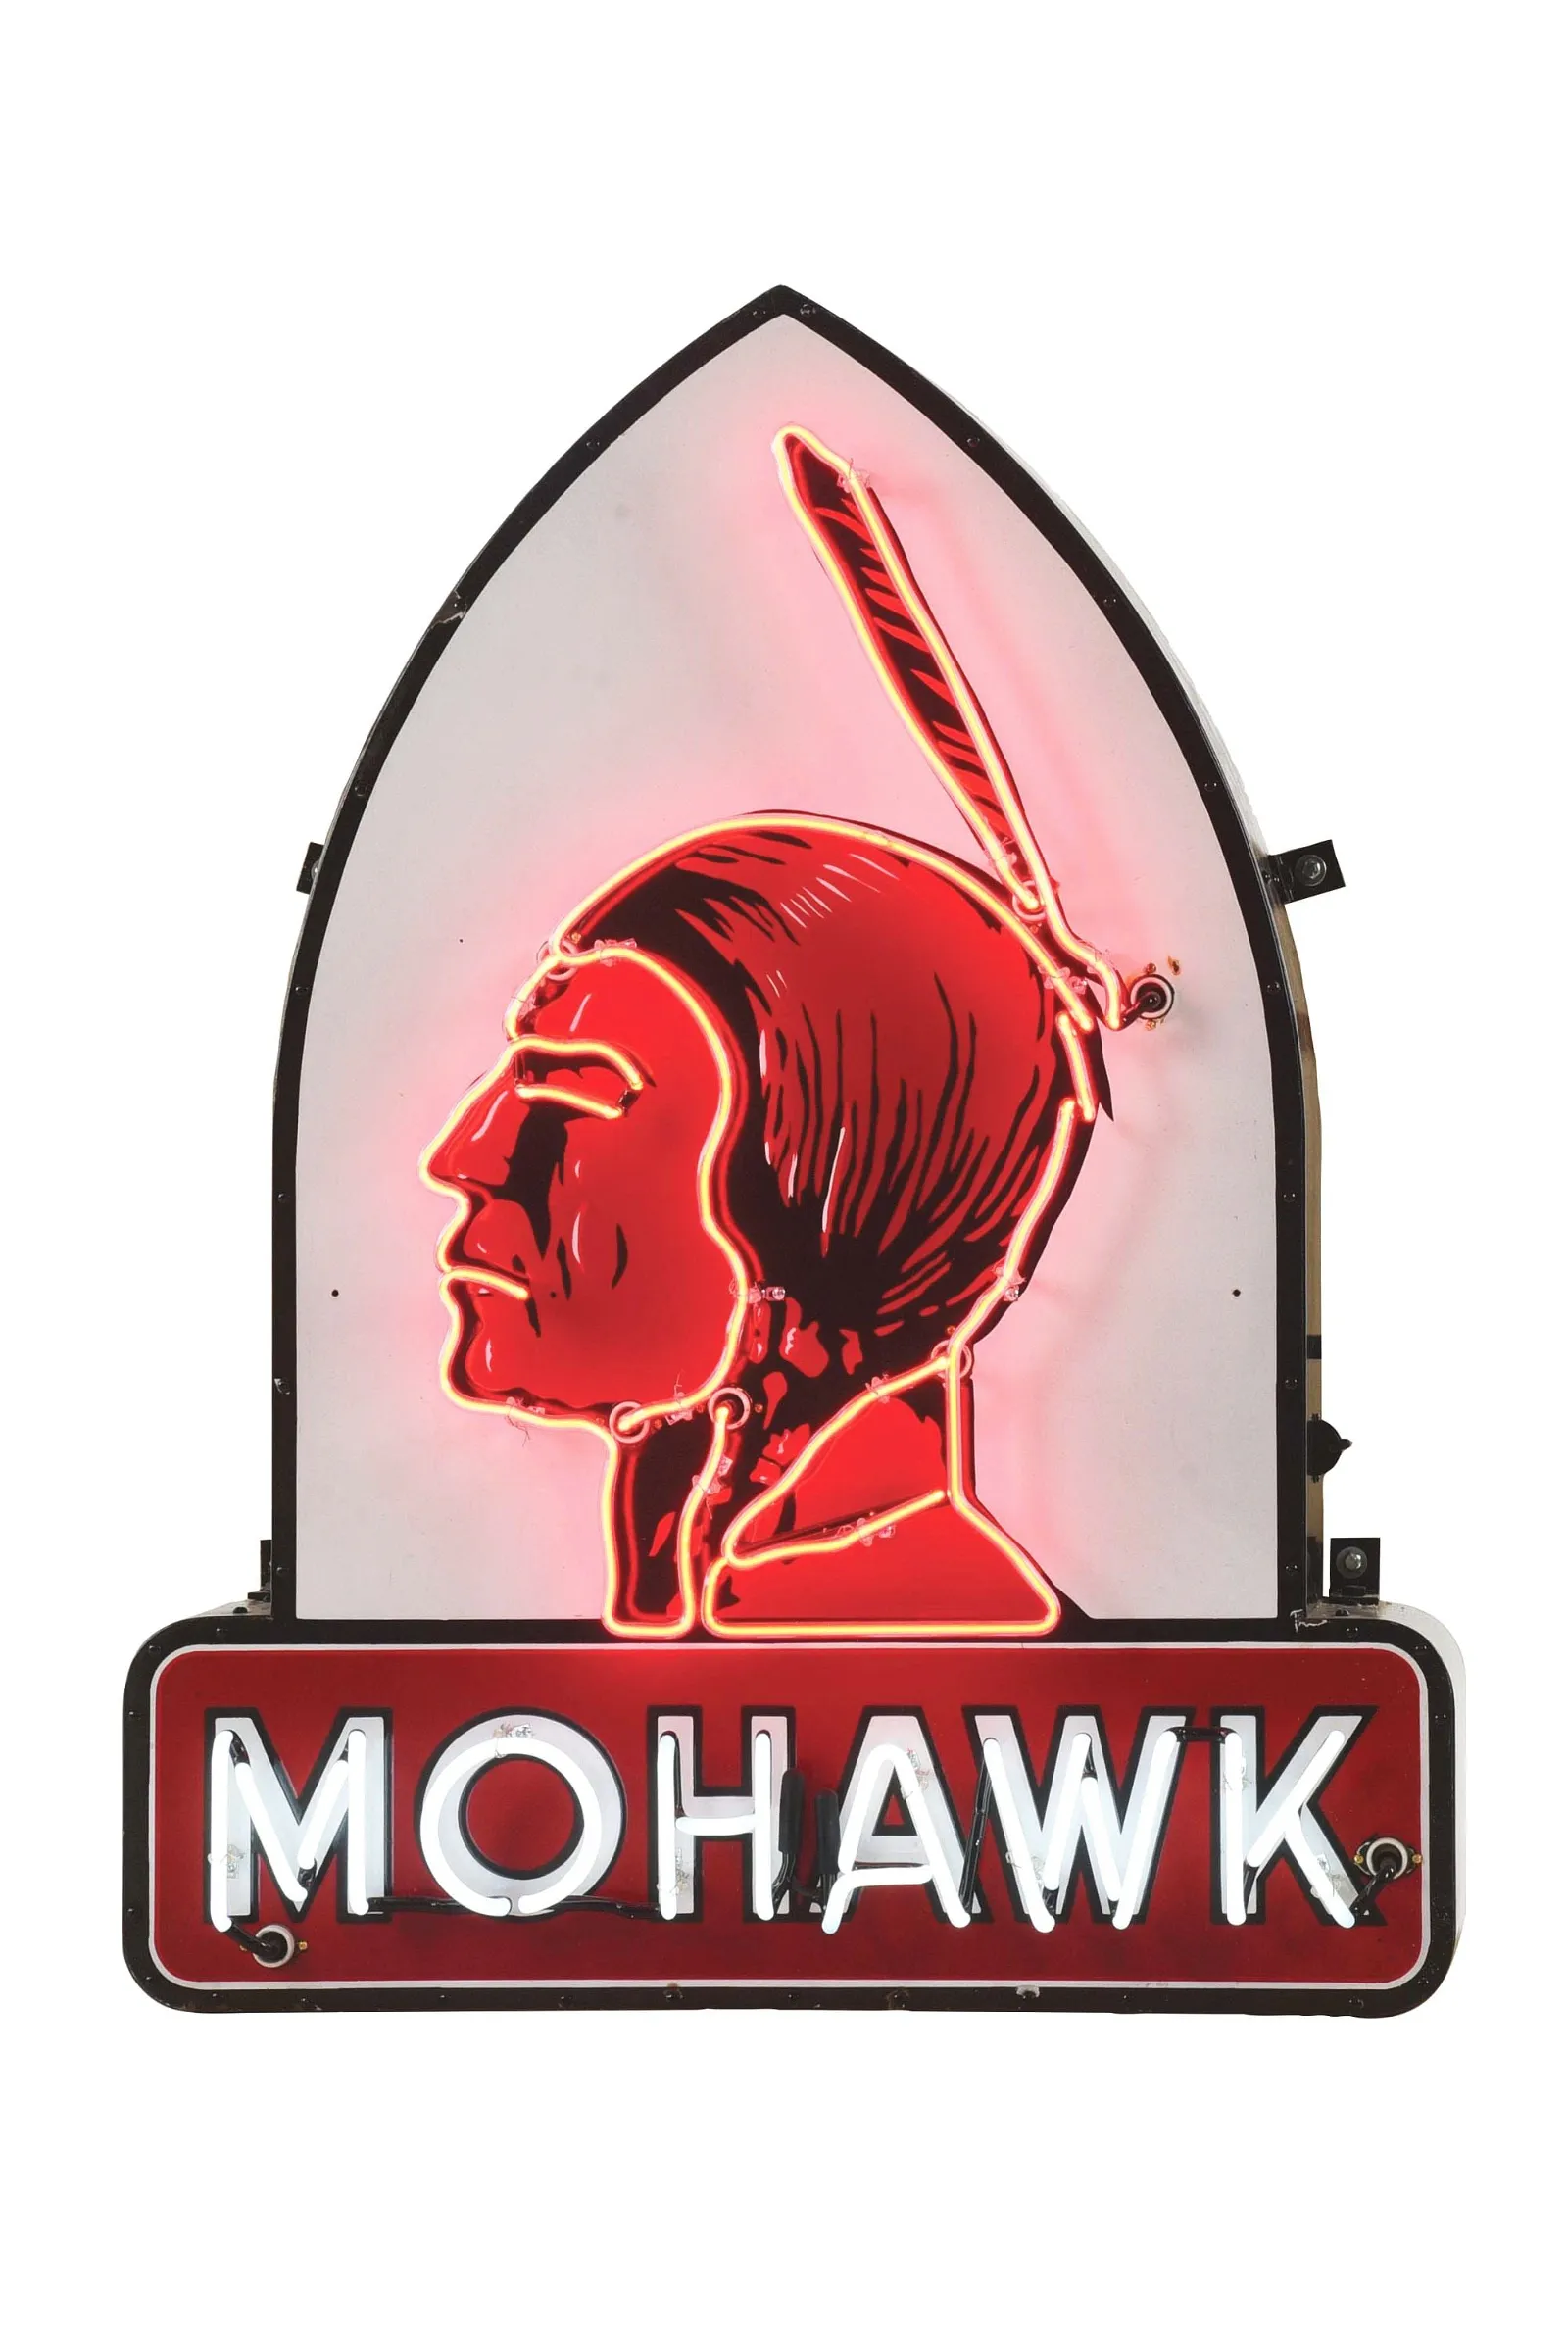 Mohawk Gasoline neon sign, which sold for $105,000 at Morphy.